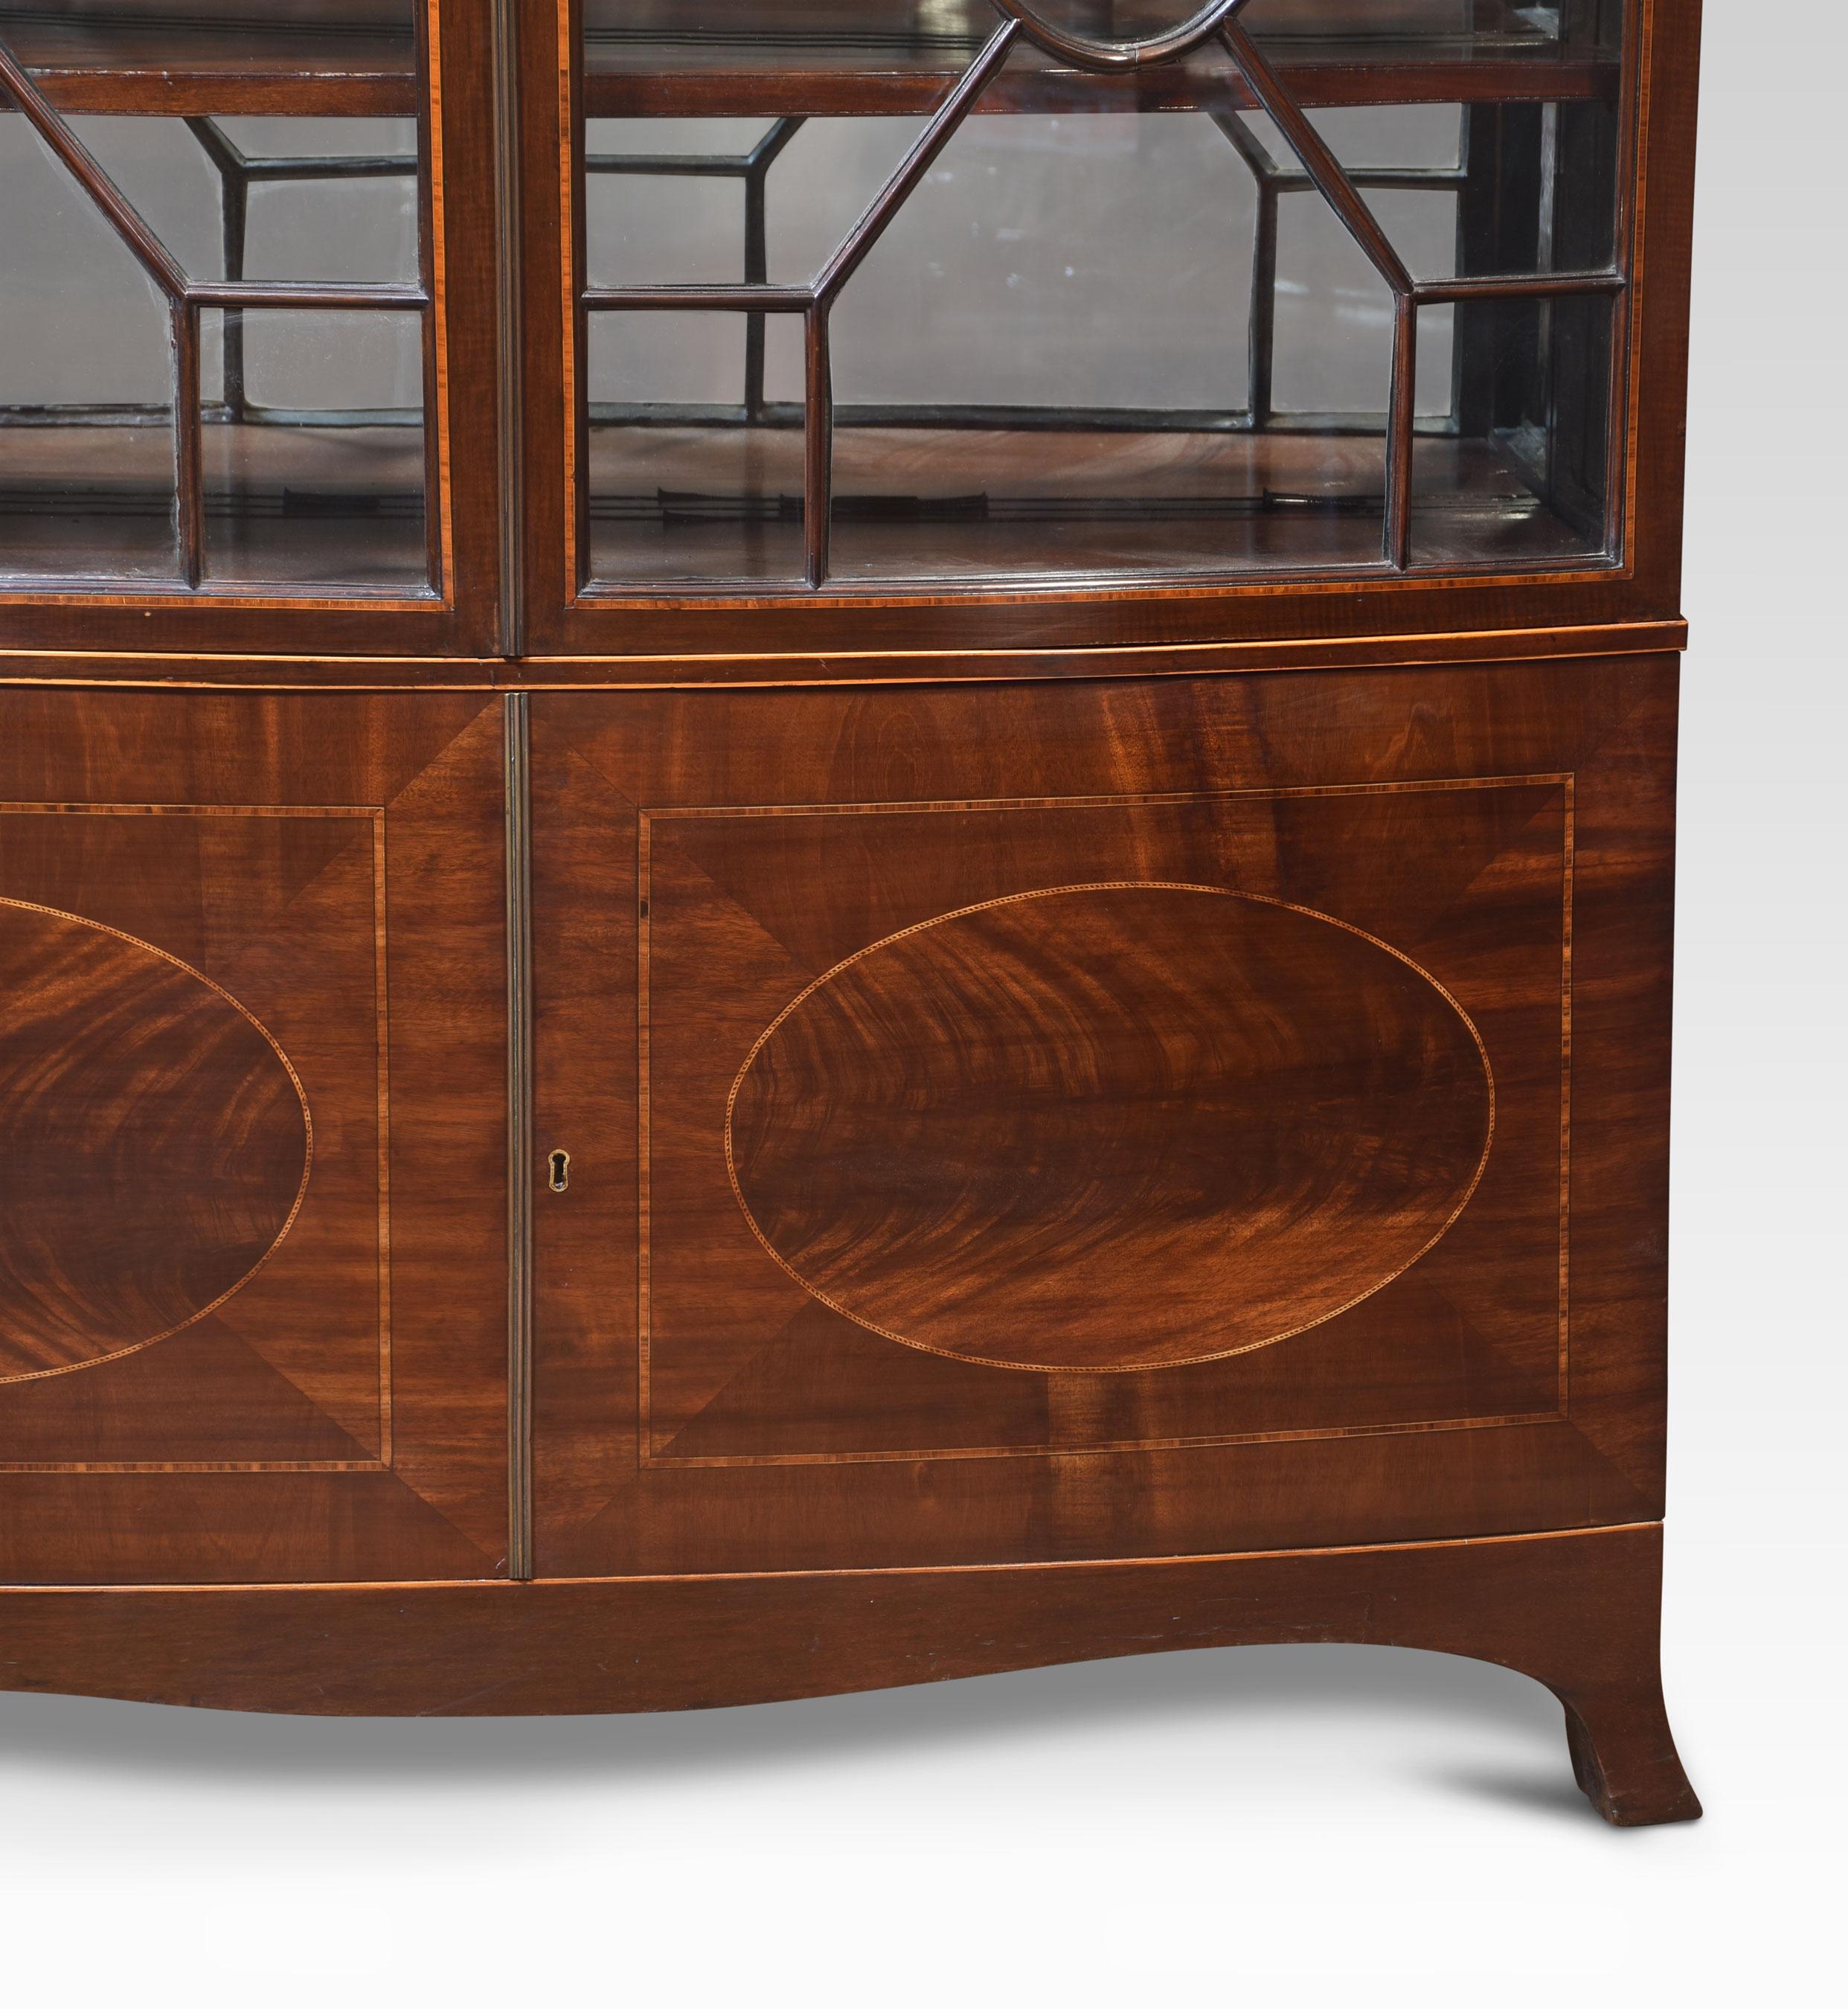 Mahogany bow front display cabinet. The shaped moulded carved cornice above a pair of astragal glazed doors enclosing unusual mirrored back and shelved interior. The base section is fitted with a pair of doors having oval detail to the centre. All